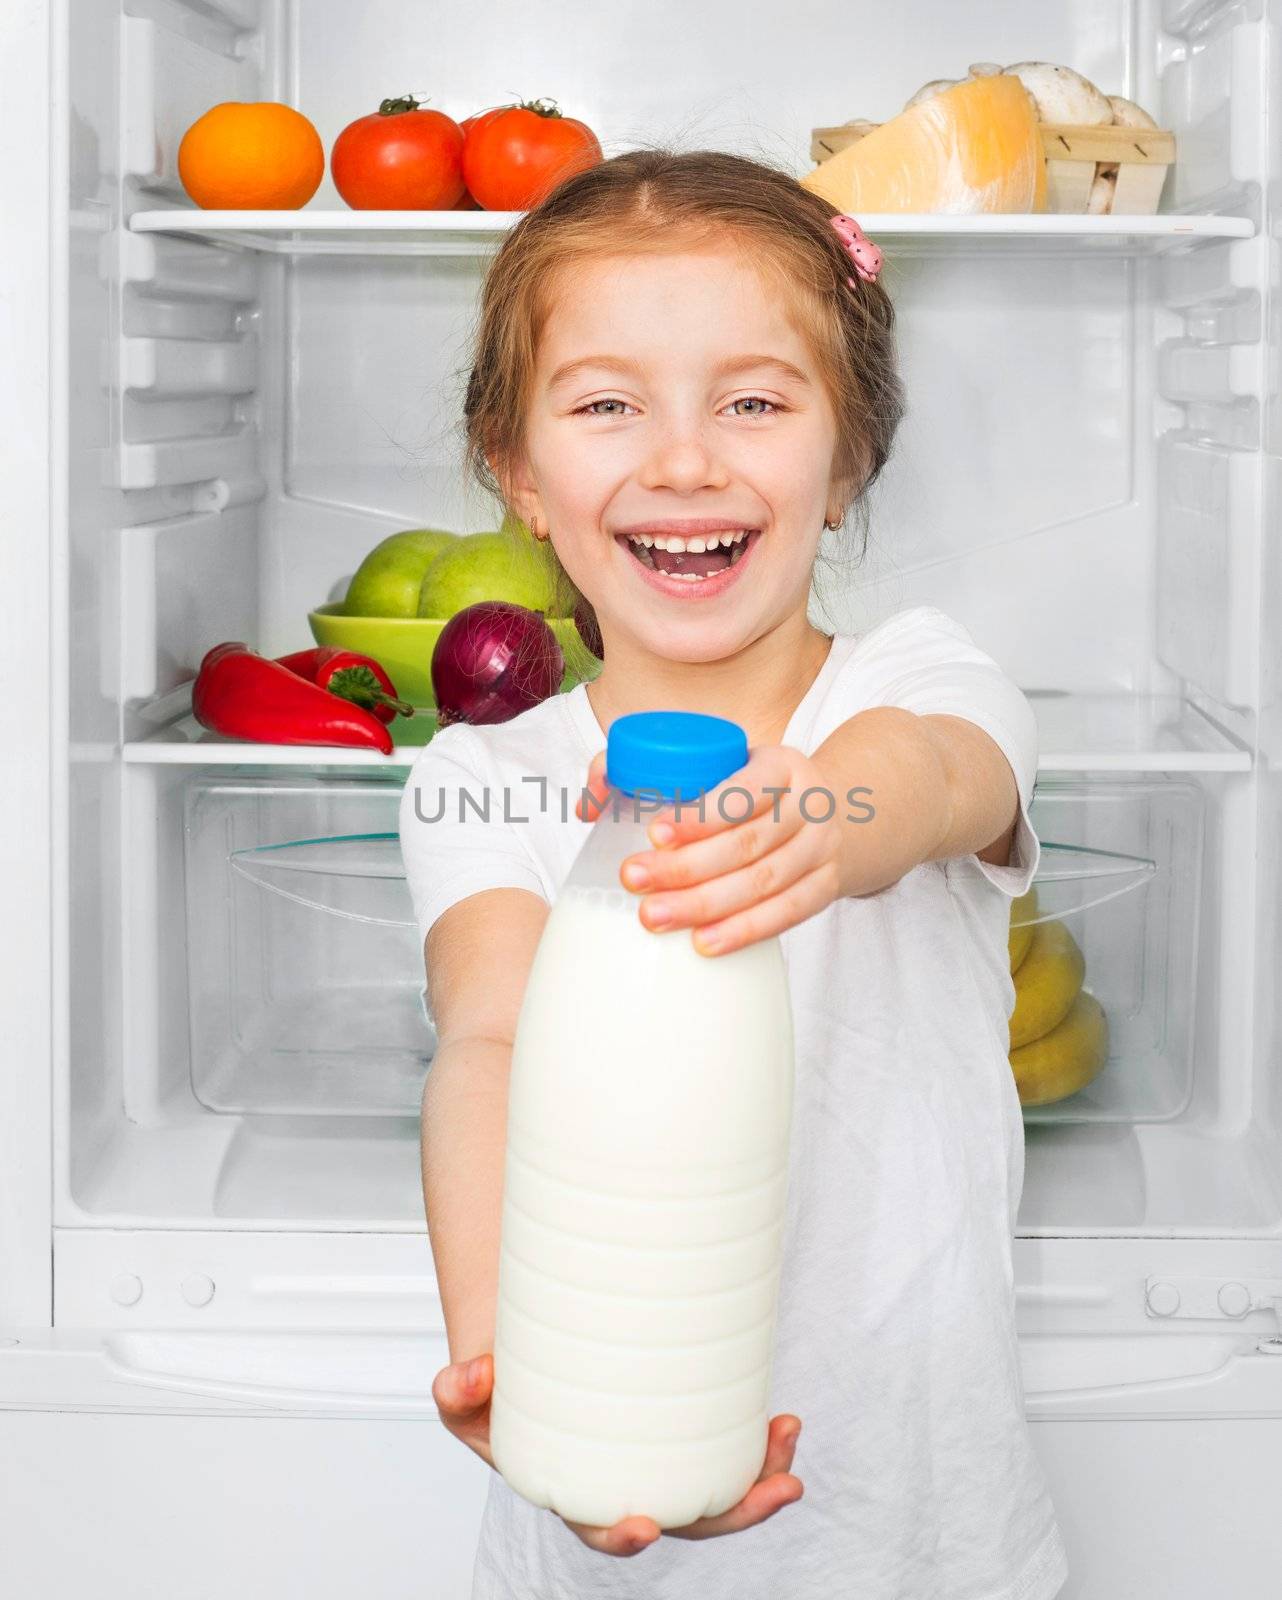 little girl with orange against a refrigerator with food